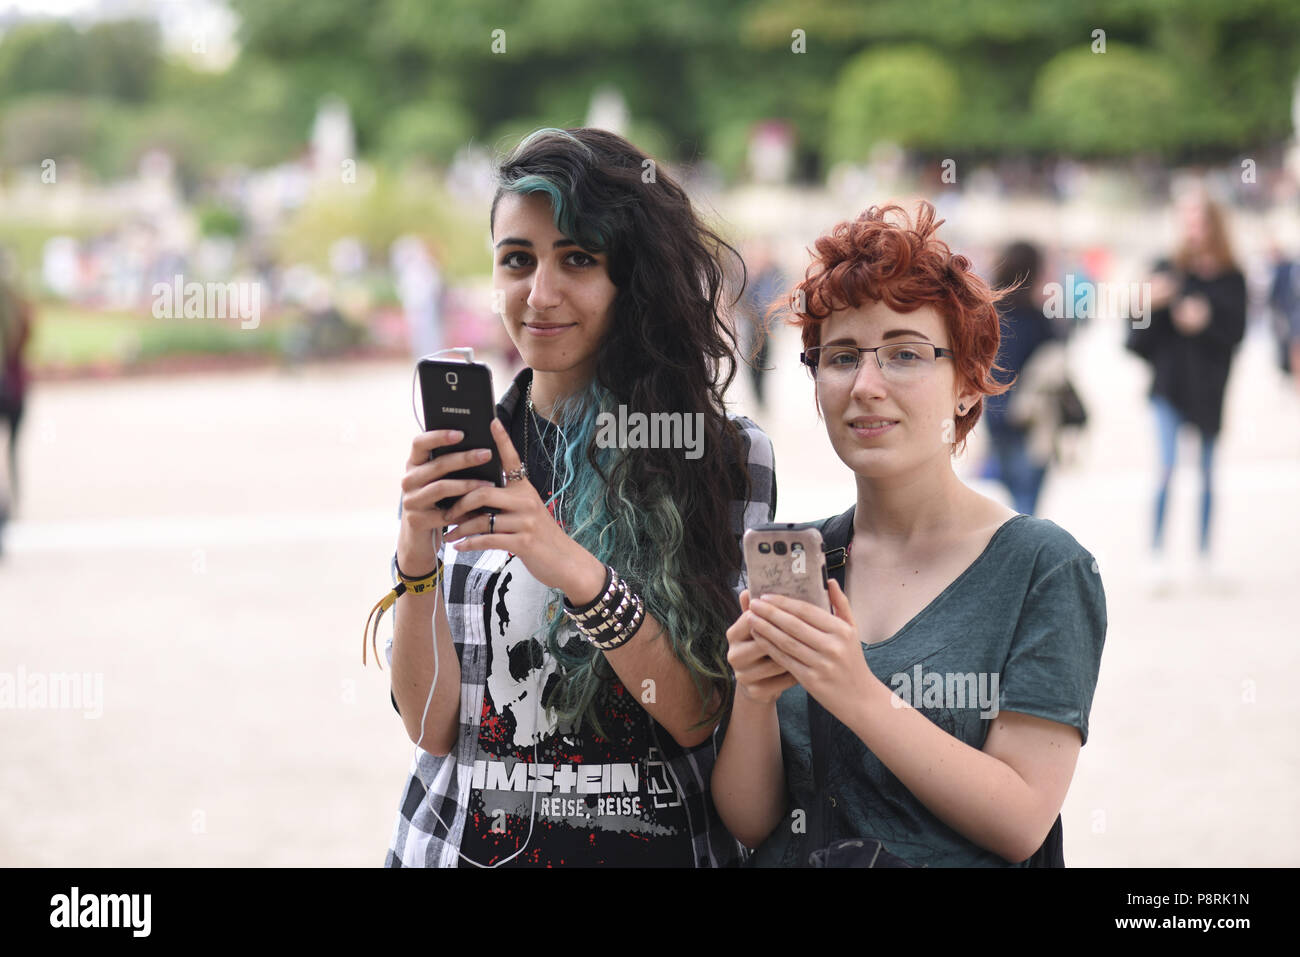 July 14, 2016 - Paris, France: French arts students Calypso (L), 17 yo, and Lorenz, 18yo, take part in a mass Pokemon hunt in the Luxembourg Garden in central Paris. Hundreds of players of the new Pokemon Go game showed up to take part in a massive hunt despite the authorities' attempt to cancel the event. Despite playing mostly solo, the Pokemon Go users enjoyed to interact and meet other players. Millions of users have already downloaded the game, which requires users to catch on-screen pokemon characters using their real-world location. Des jeunes participent a une chasse au Pokemons dans l Stock Photo